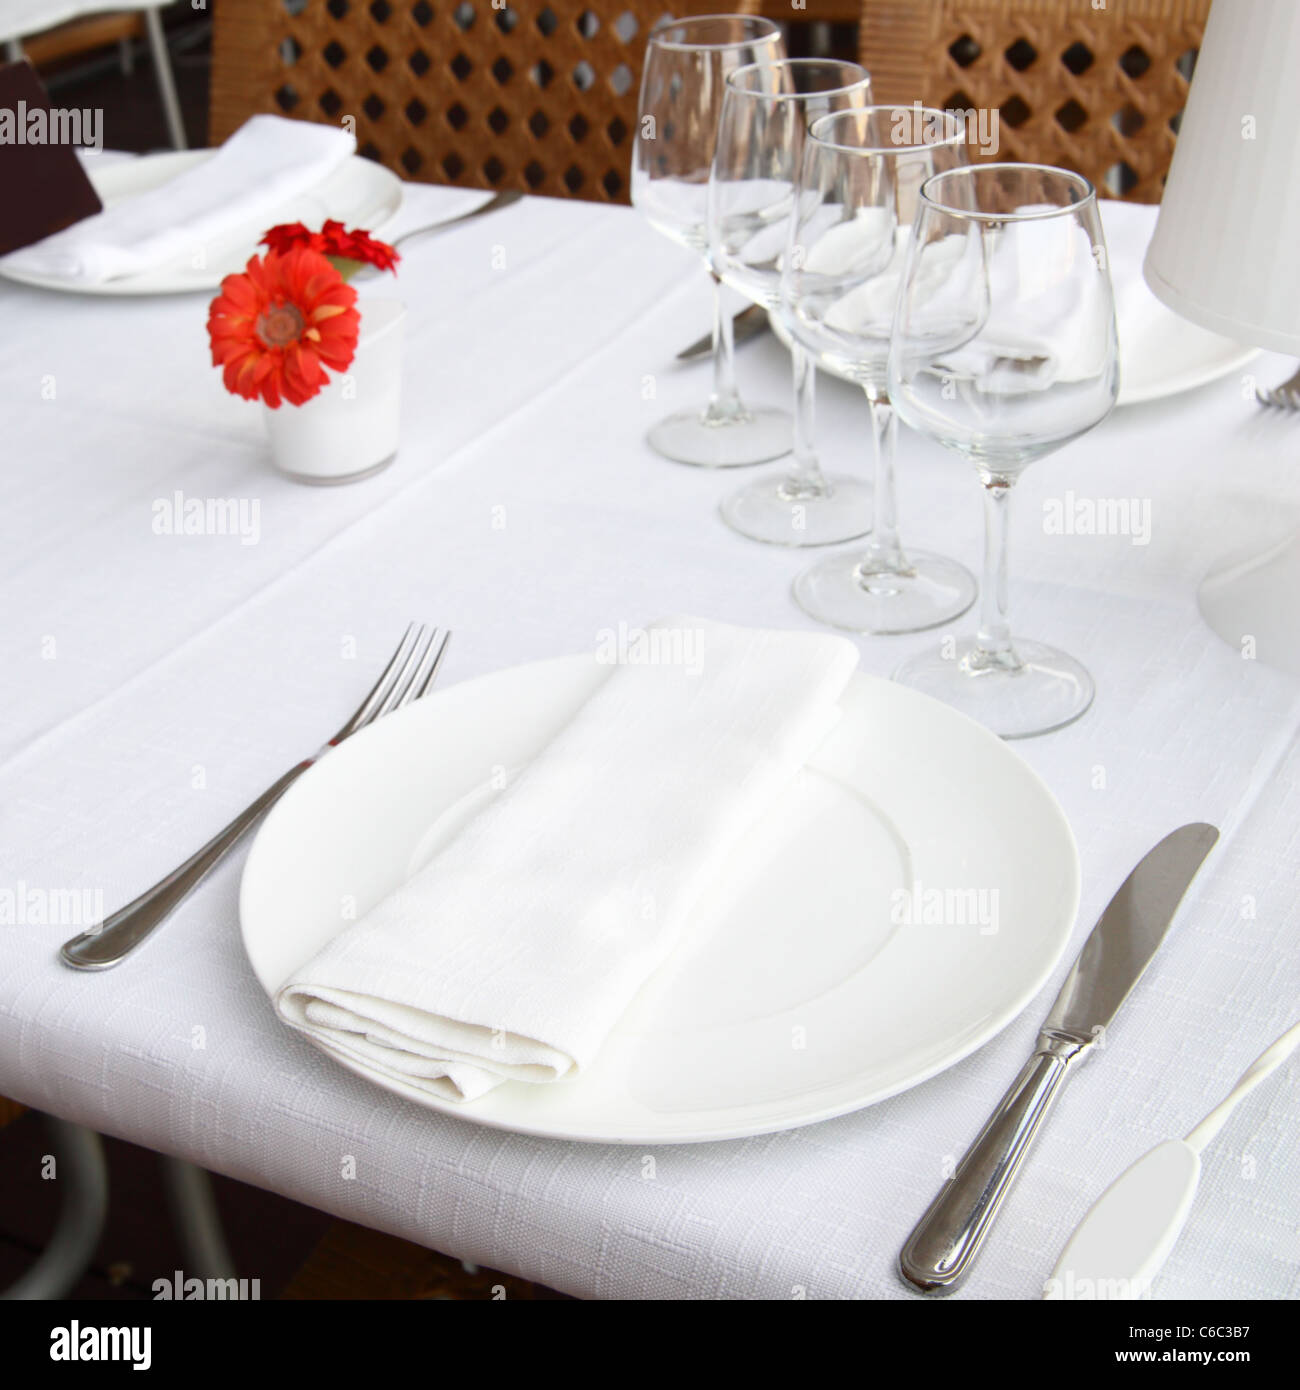 Table appointments at a restaurant close-up Stock Photo